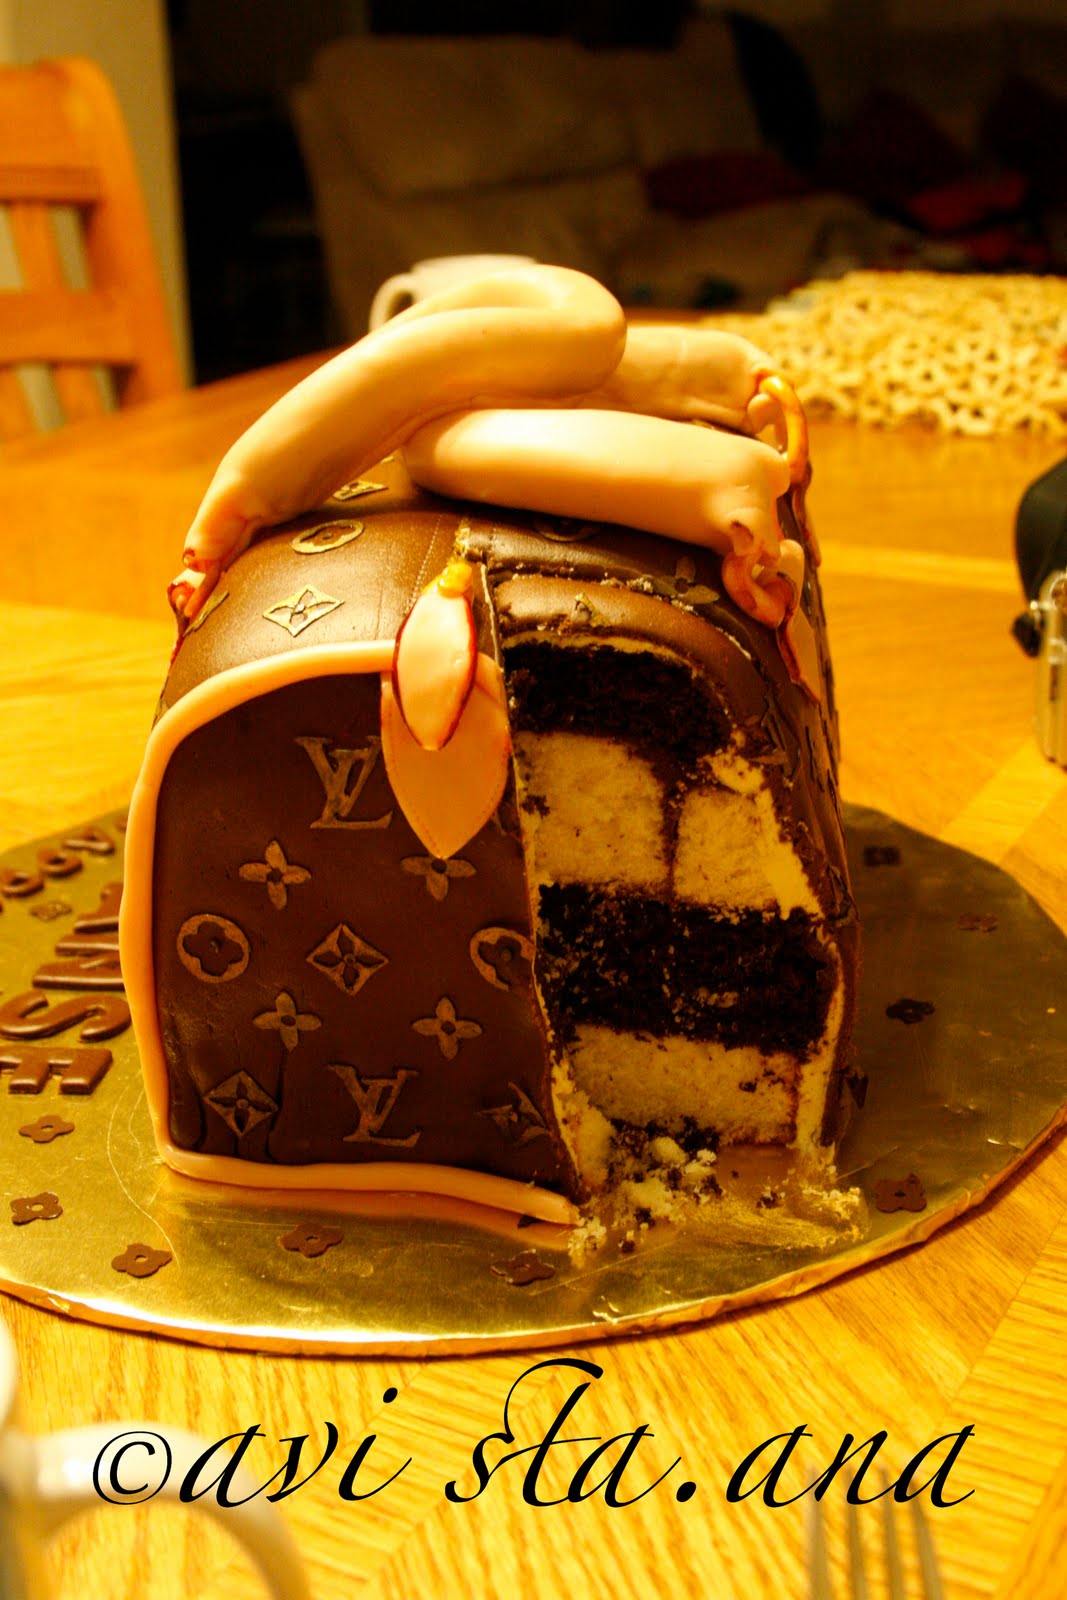 Caked Up - Glam LV cake